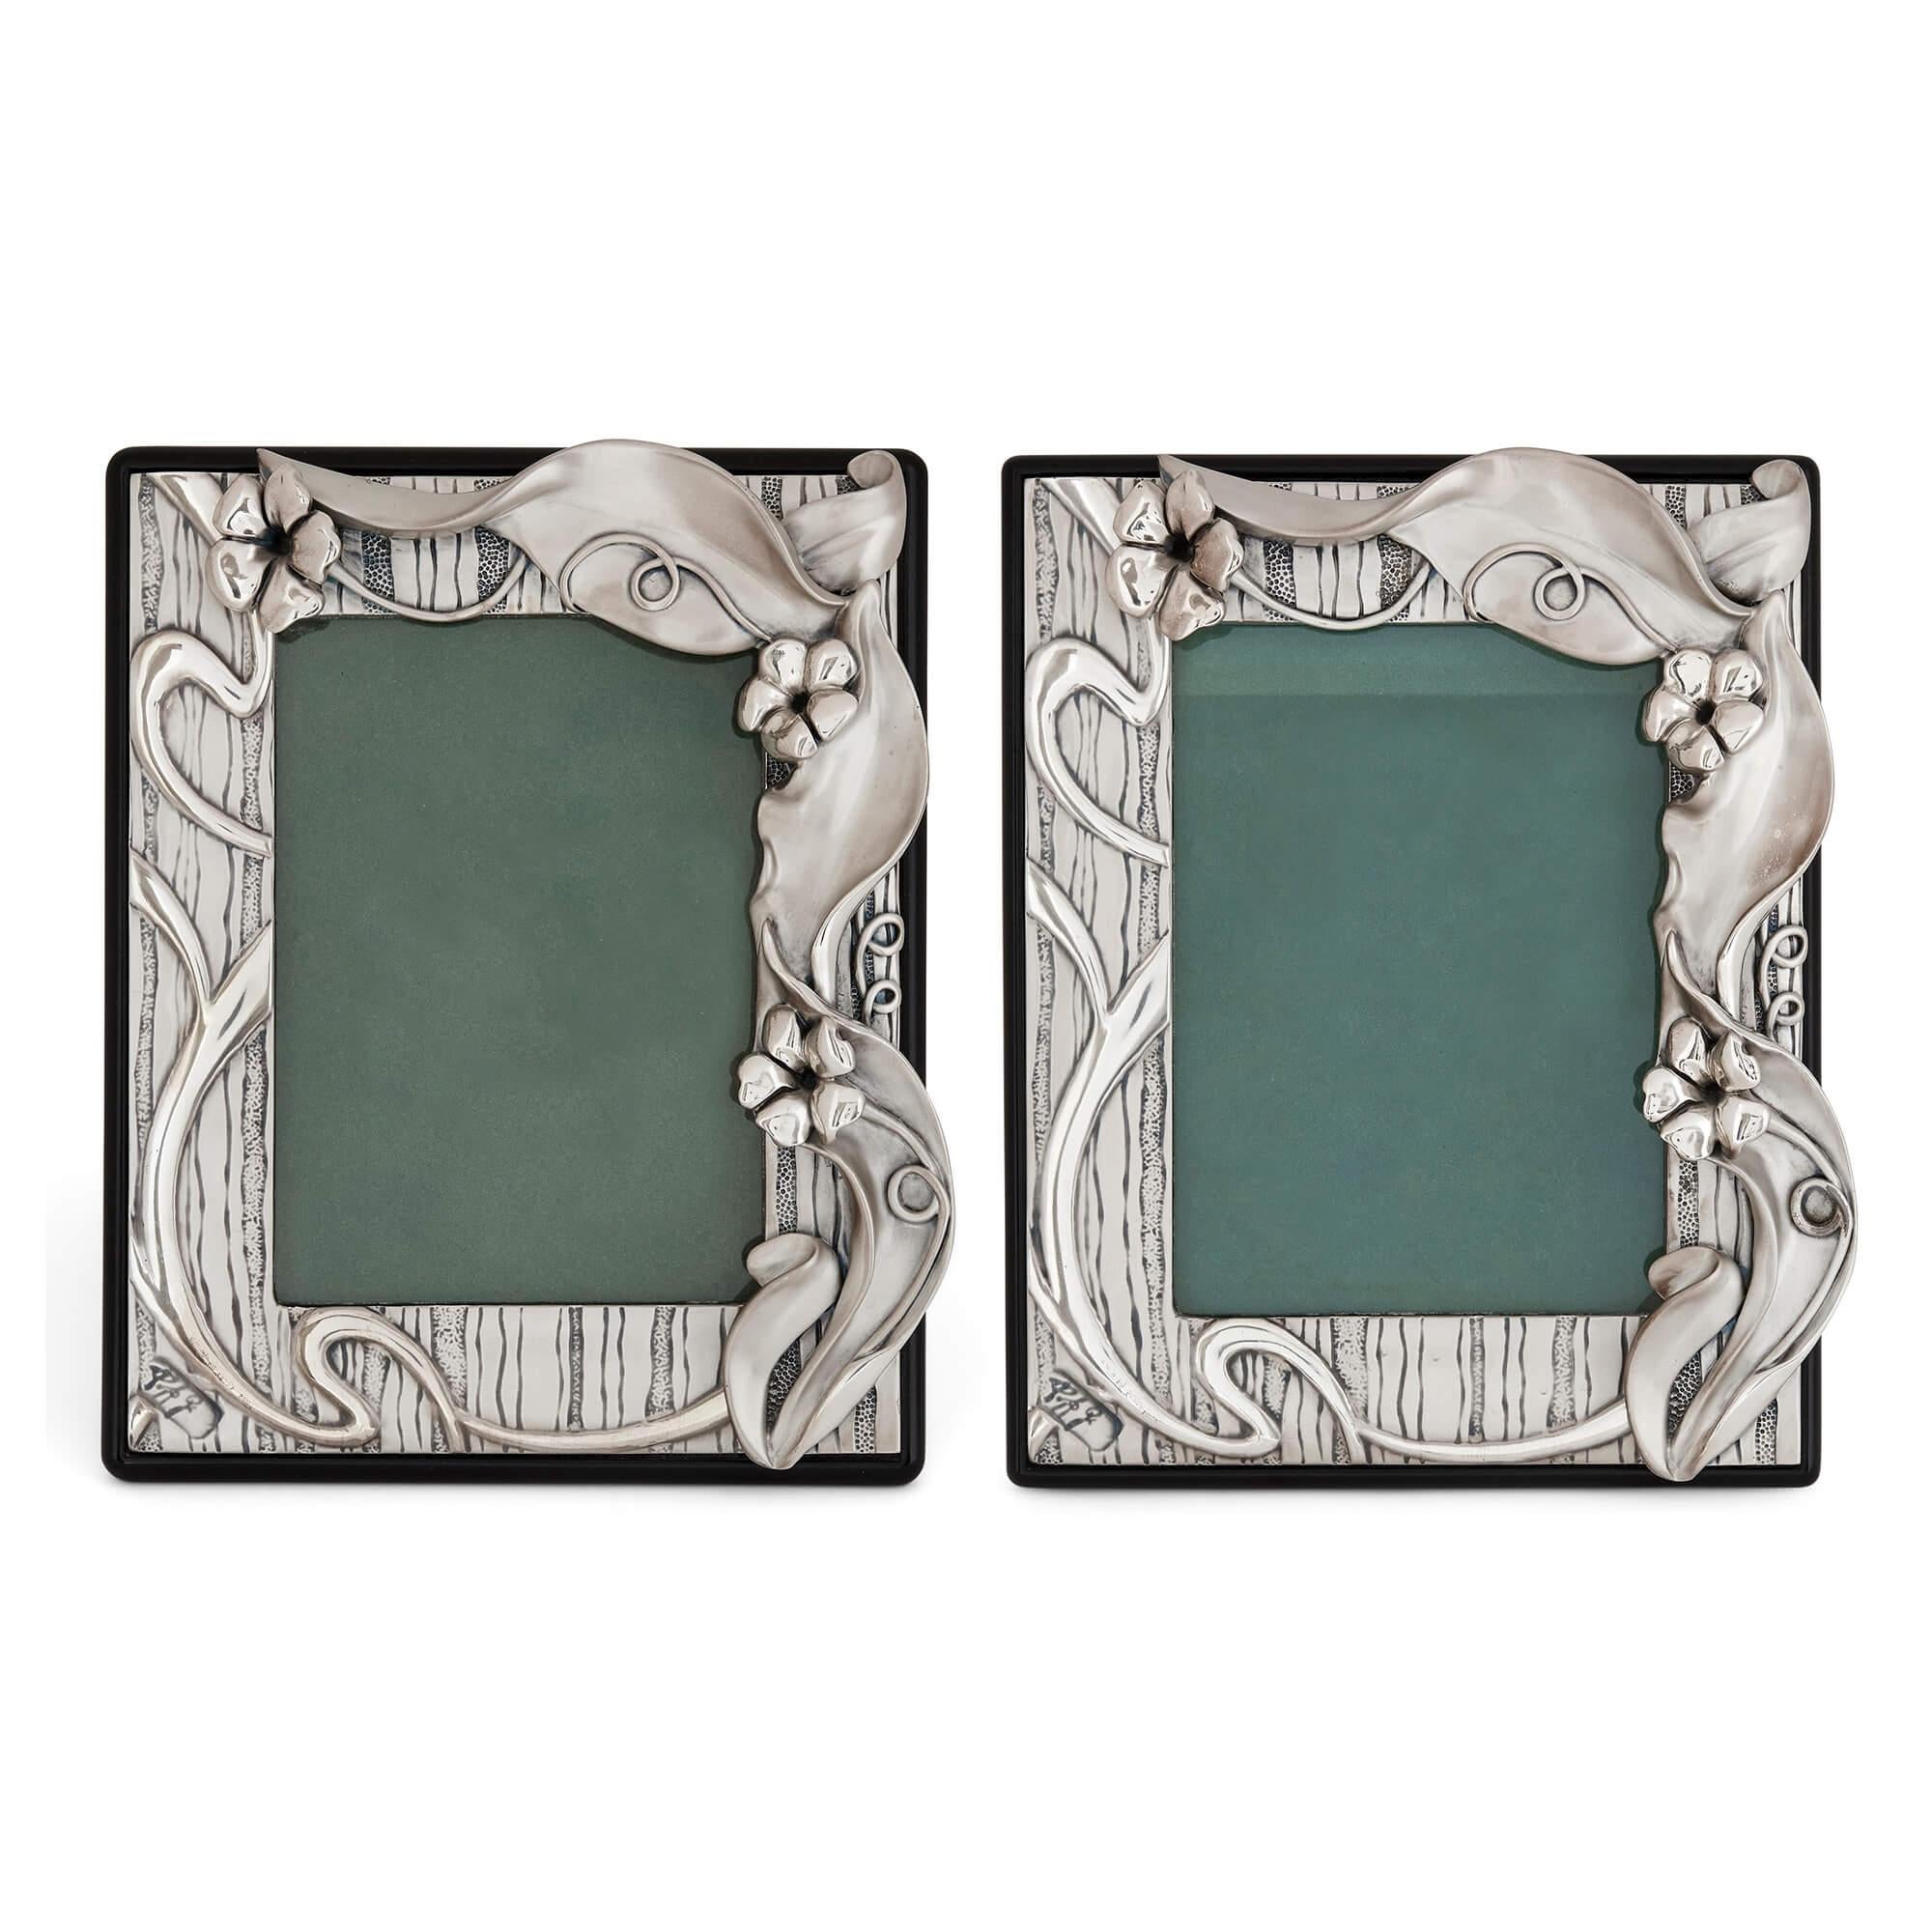 Pair of Italian silver picture frames in the Art Nouveau style.
Italian, 20th Century
Measures: height 24cm, width 20cm, depth 4cm, depth when open 16cm.

The elegant frames in this pair are crafted in the Art Nouveau style. Each frame features